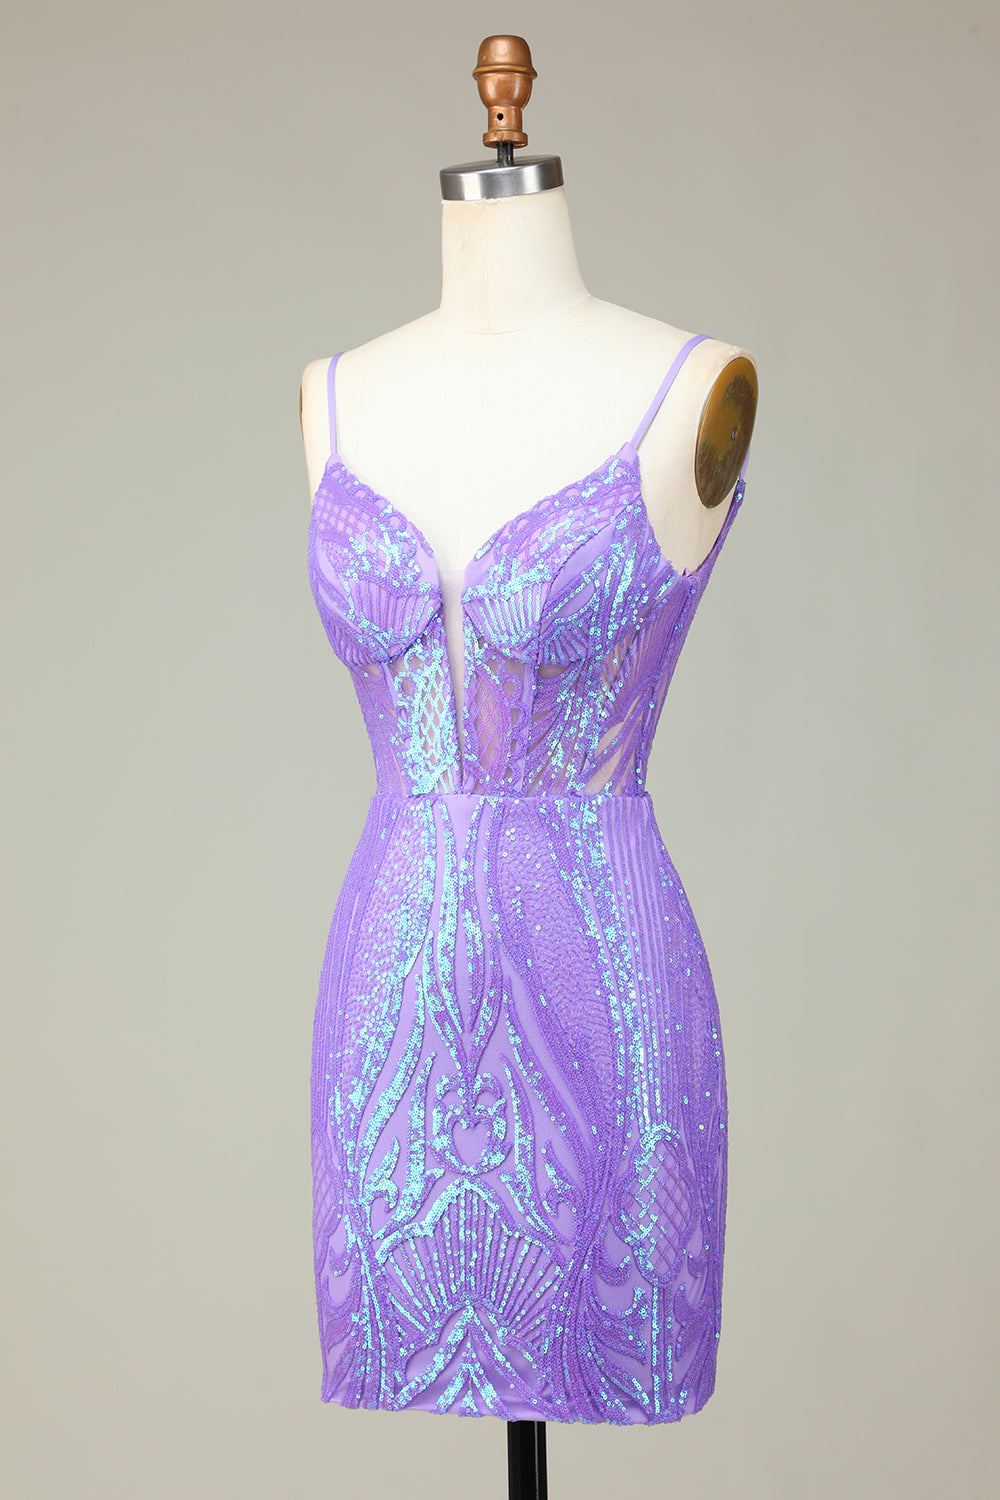 Lilac Spaghetti Straps Tight Short Homecoming Dress with Sequins